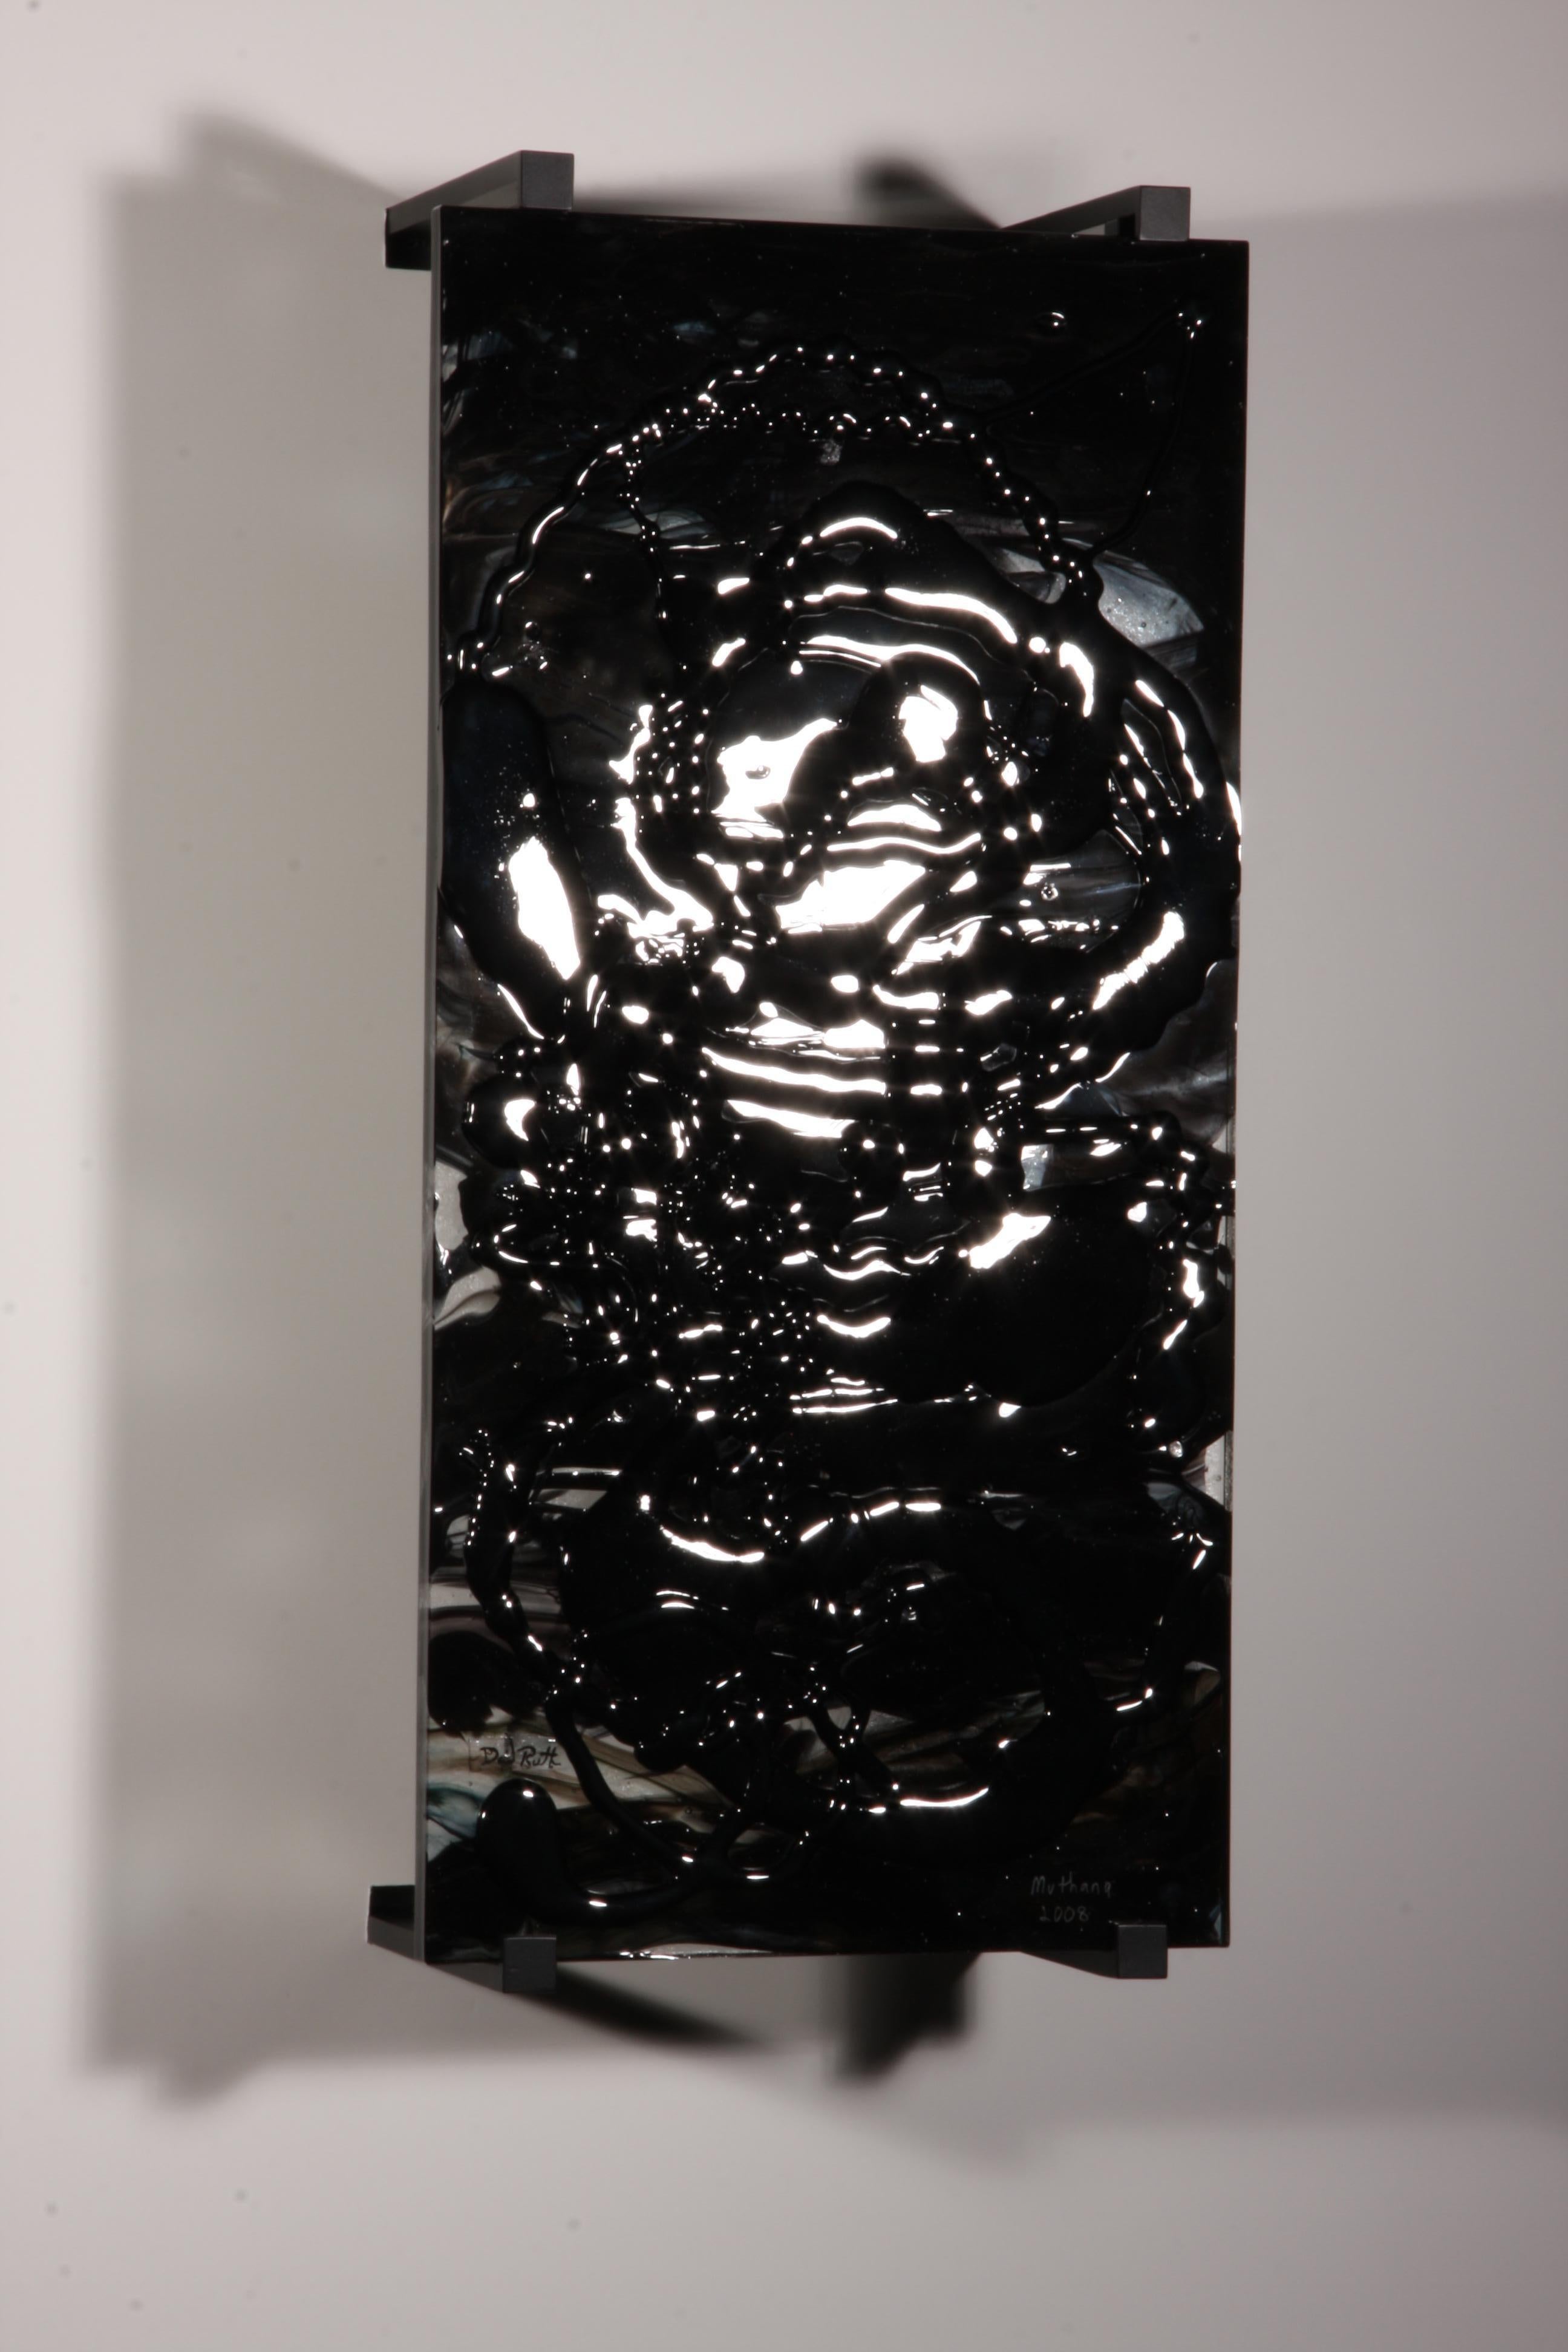 'Muthana' is a contemporary abstract glass by artist David Ruth. Created in 2008, it was a piece in a series about the David's views on the American invasion of Iraq. 

